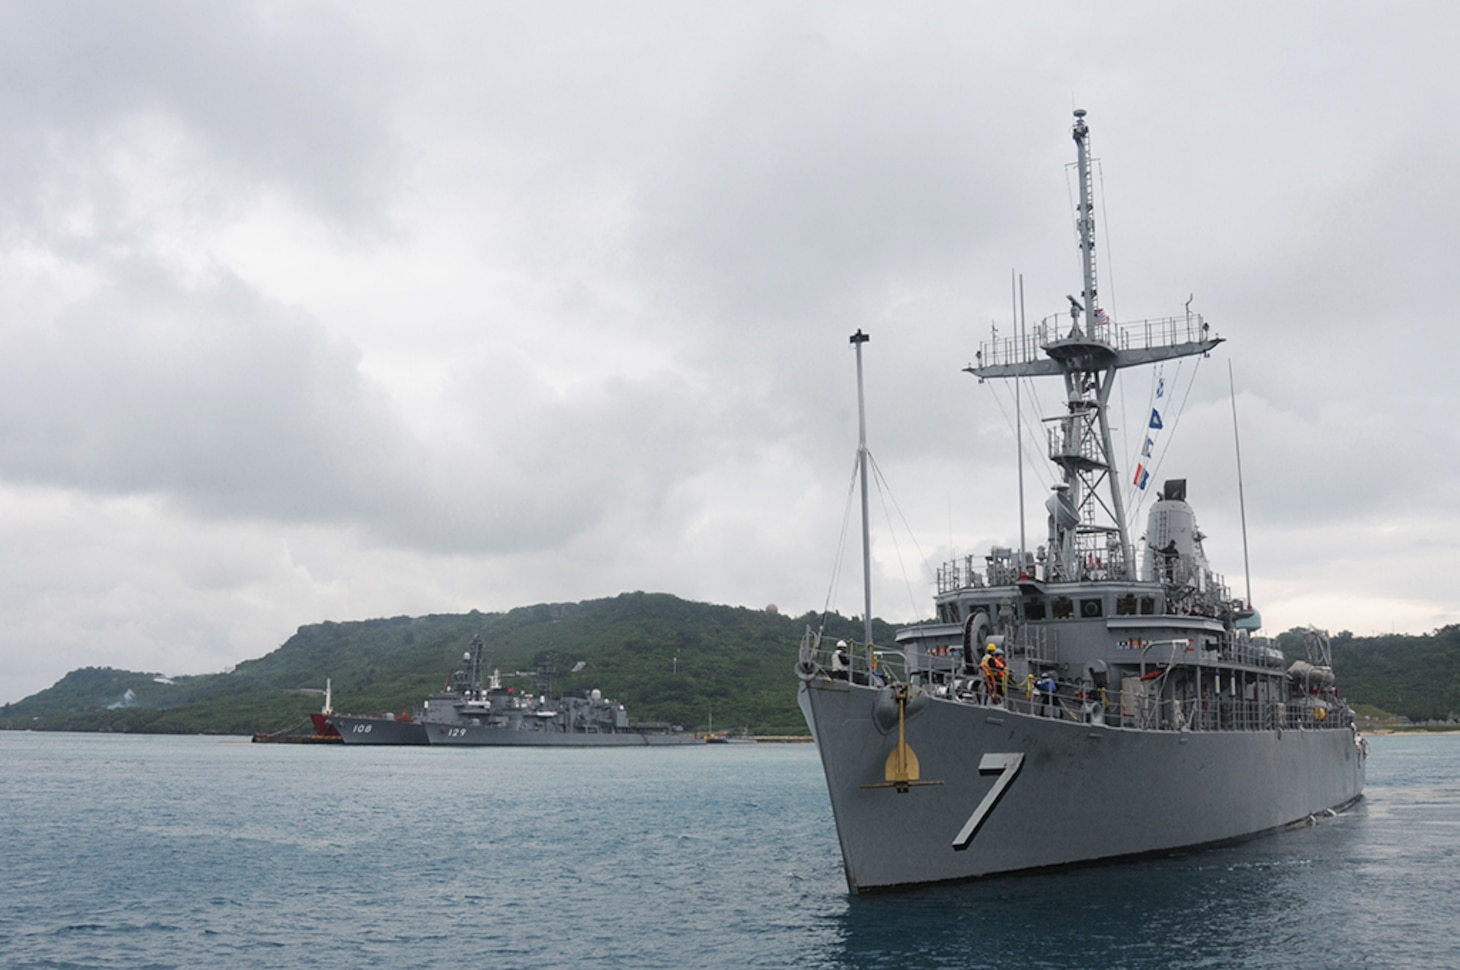 Okinawa, JAPAN  - Mine countermeasure ship USS Patriot (MCM 7) departs White Beach Naval Facility to join up with USS Chief (MCM 14) as they prepare to conduct squadron level mine countermeasure training which includes mine hunting and mine sweeping. Patriot and Chief are assigned to Mine Countermeasures Squadron (MCMRON) 7 forward deployed to Sasebo, Japan in U.S. 7th Fleet area of operations supporting security and stability in the Indo-Asia-Pacific region.